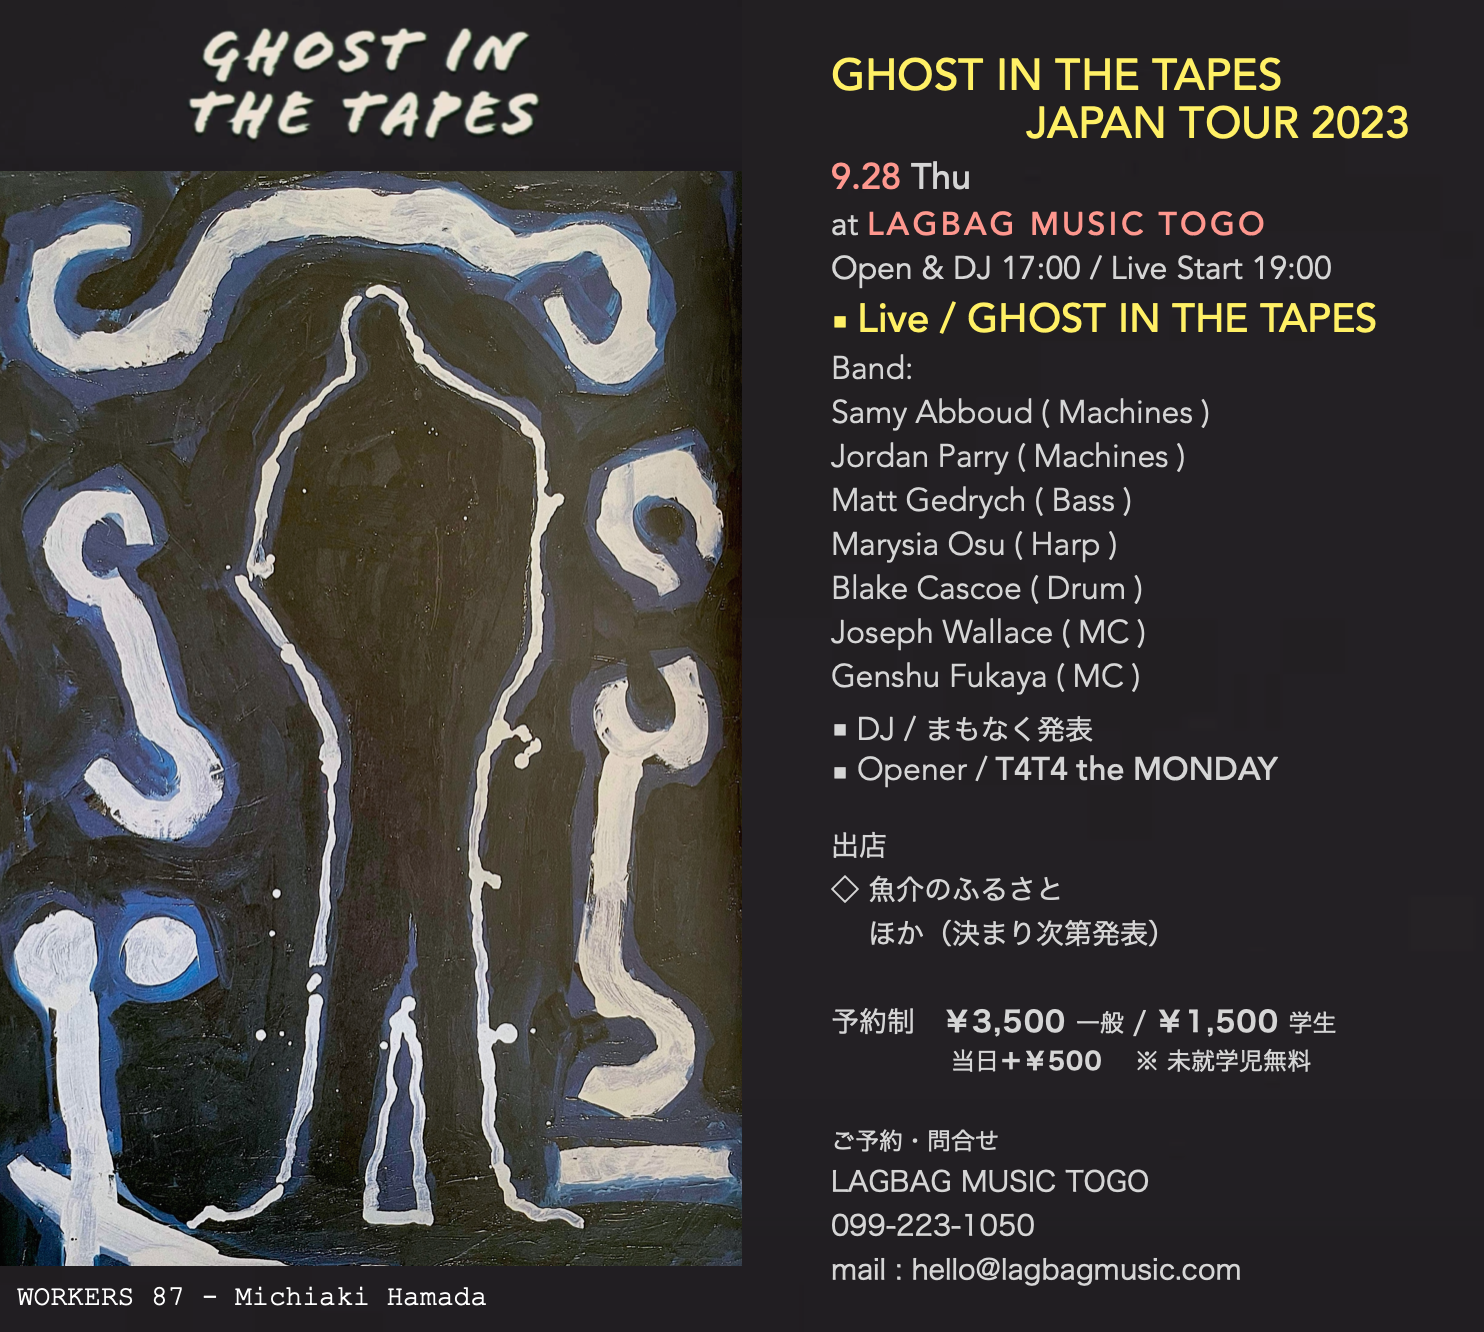 9.28 GHOST IN THE TAPES JAPAN TOUR 鹿児島公演 LAGBAG MUSIC TOGO開催のお知らせ